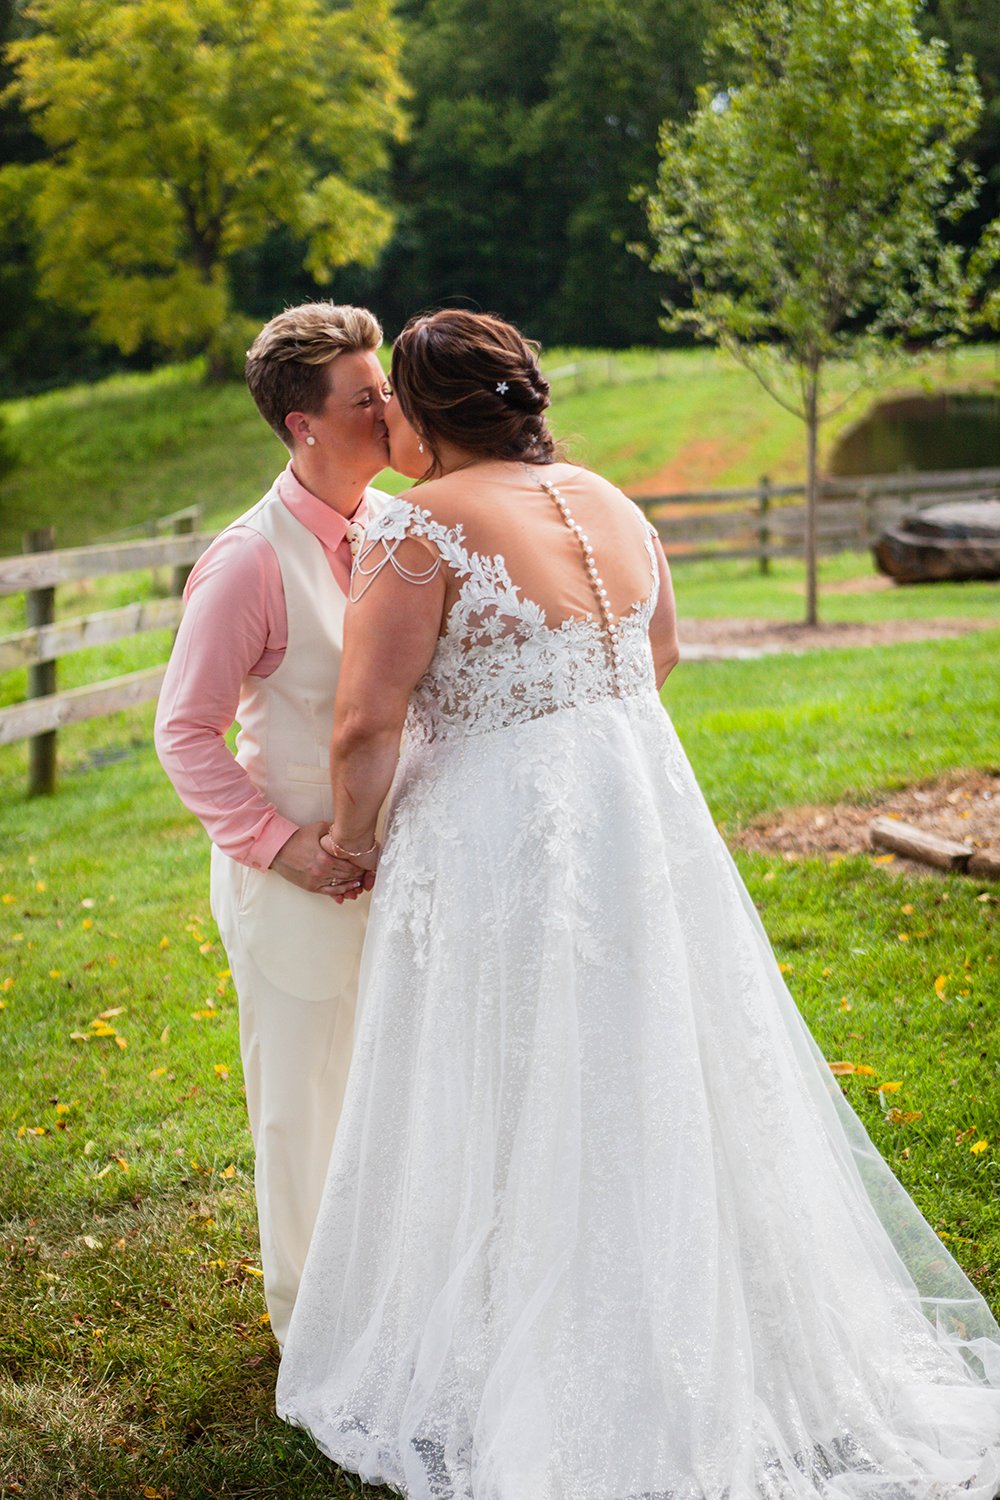 A lesbian couple kisses one another after their first look on their wedding day in Virginia.